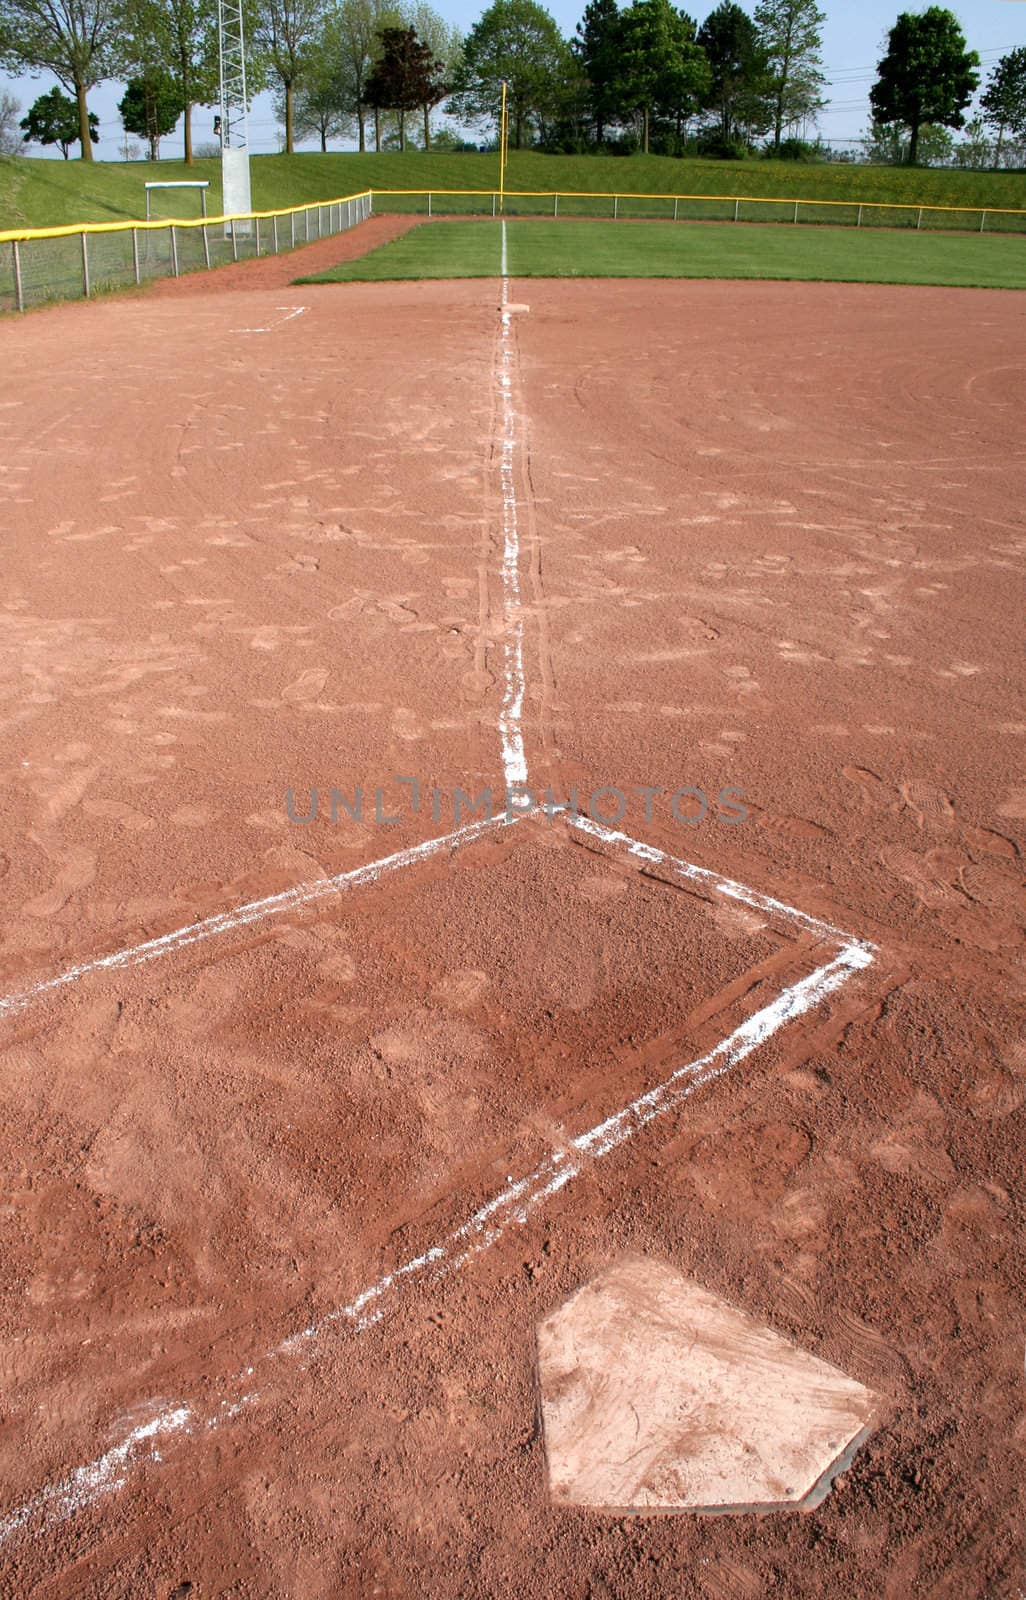 A wide-angle shot looking down the left field line from the plate and batters box.